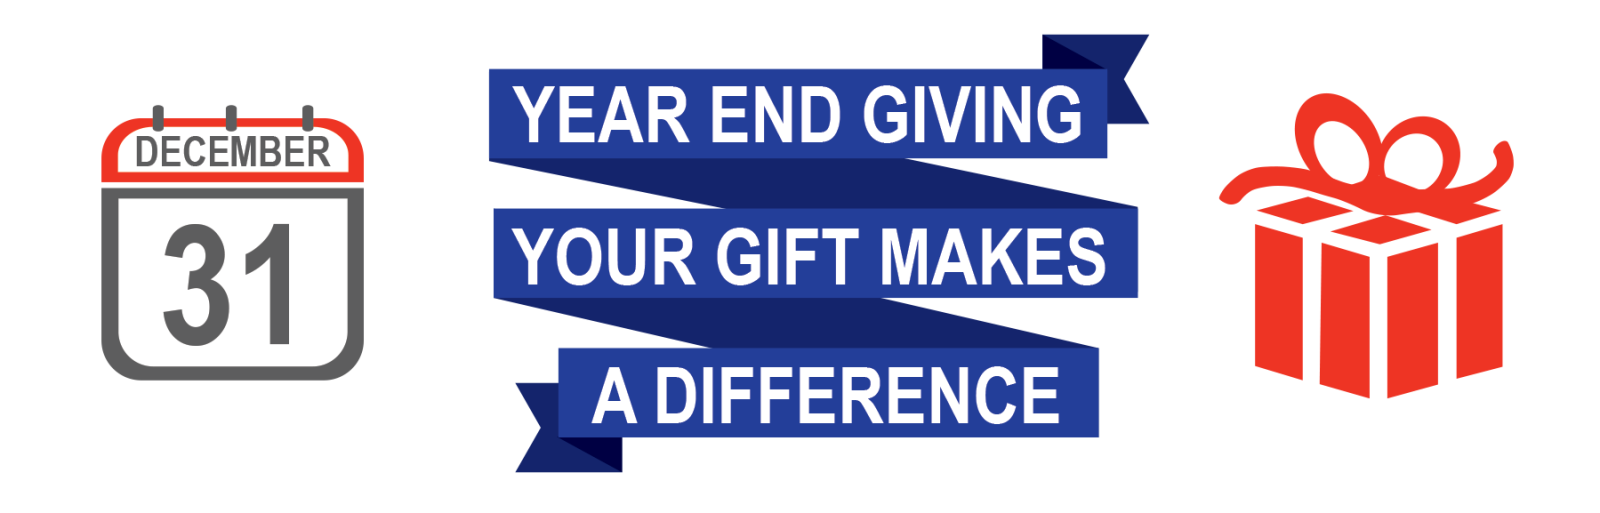 Year End Giving - Your Gift Makes a Difference